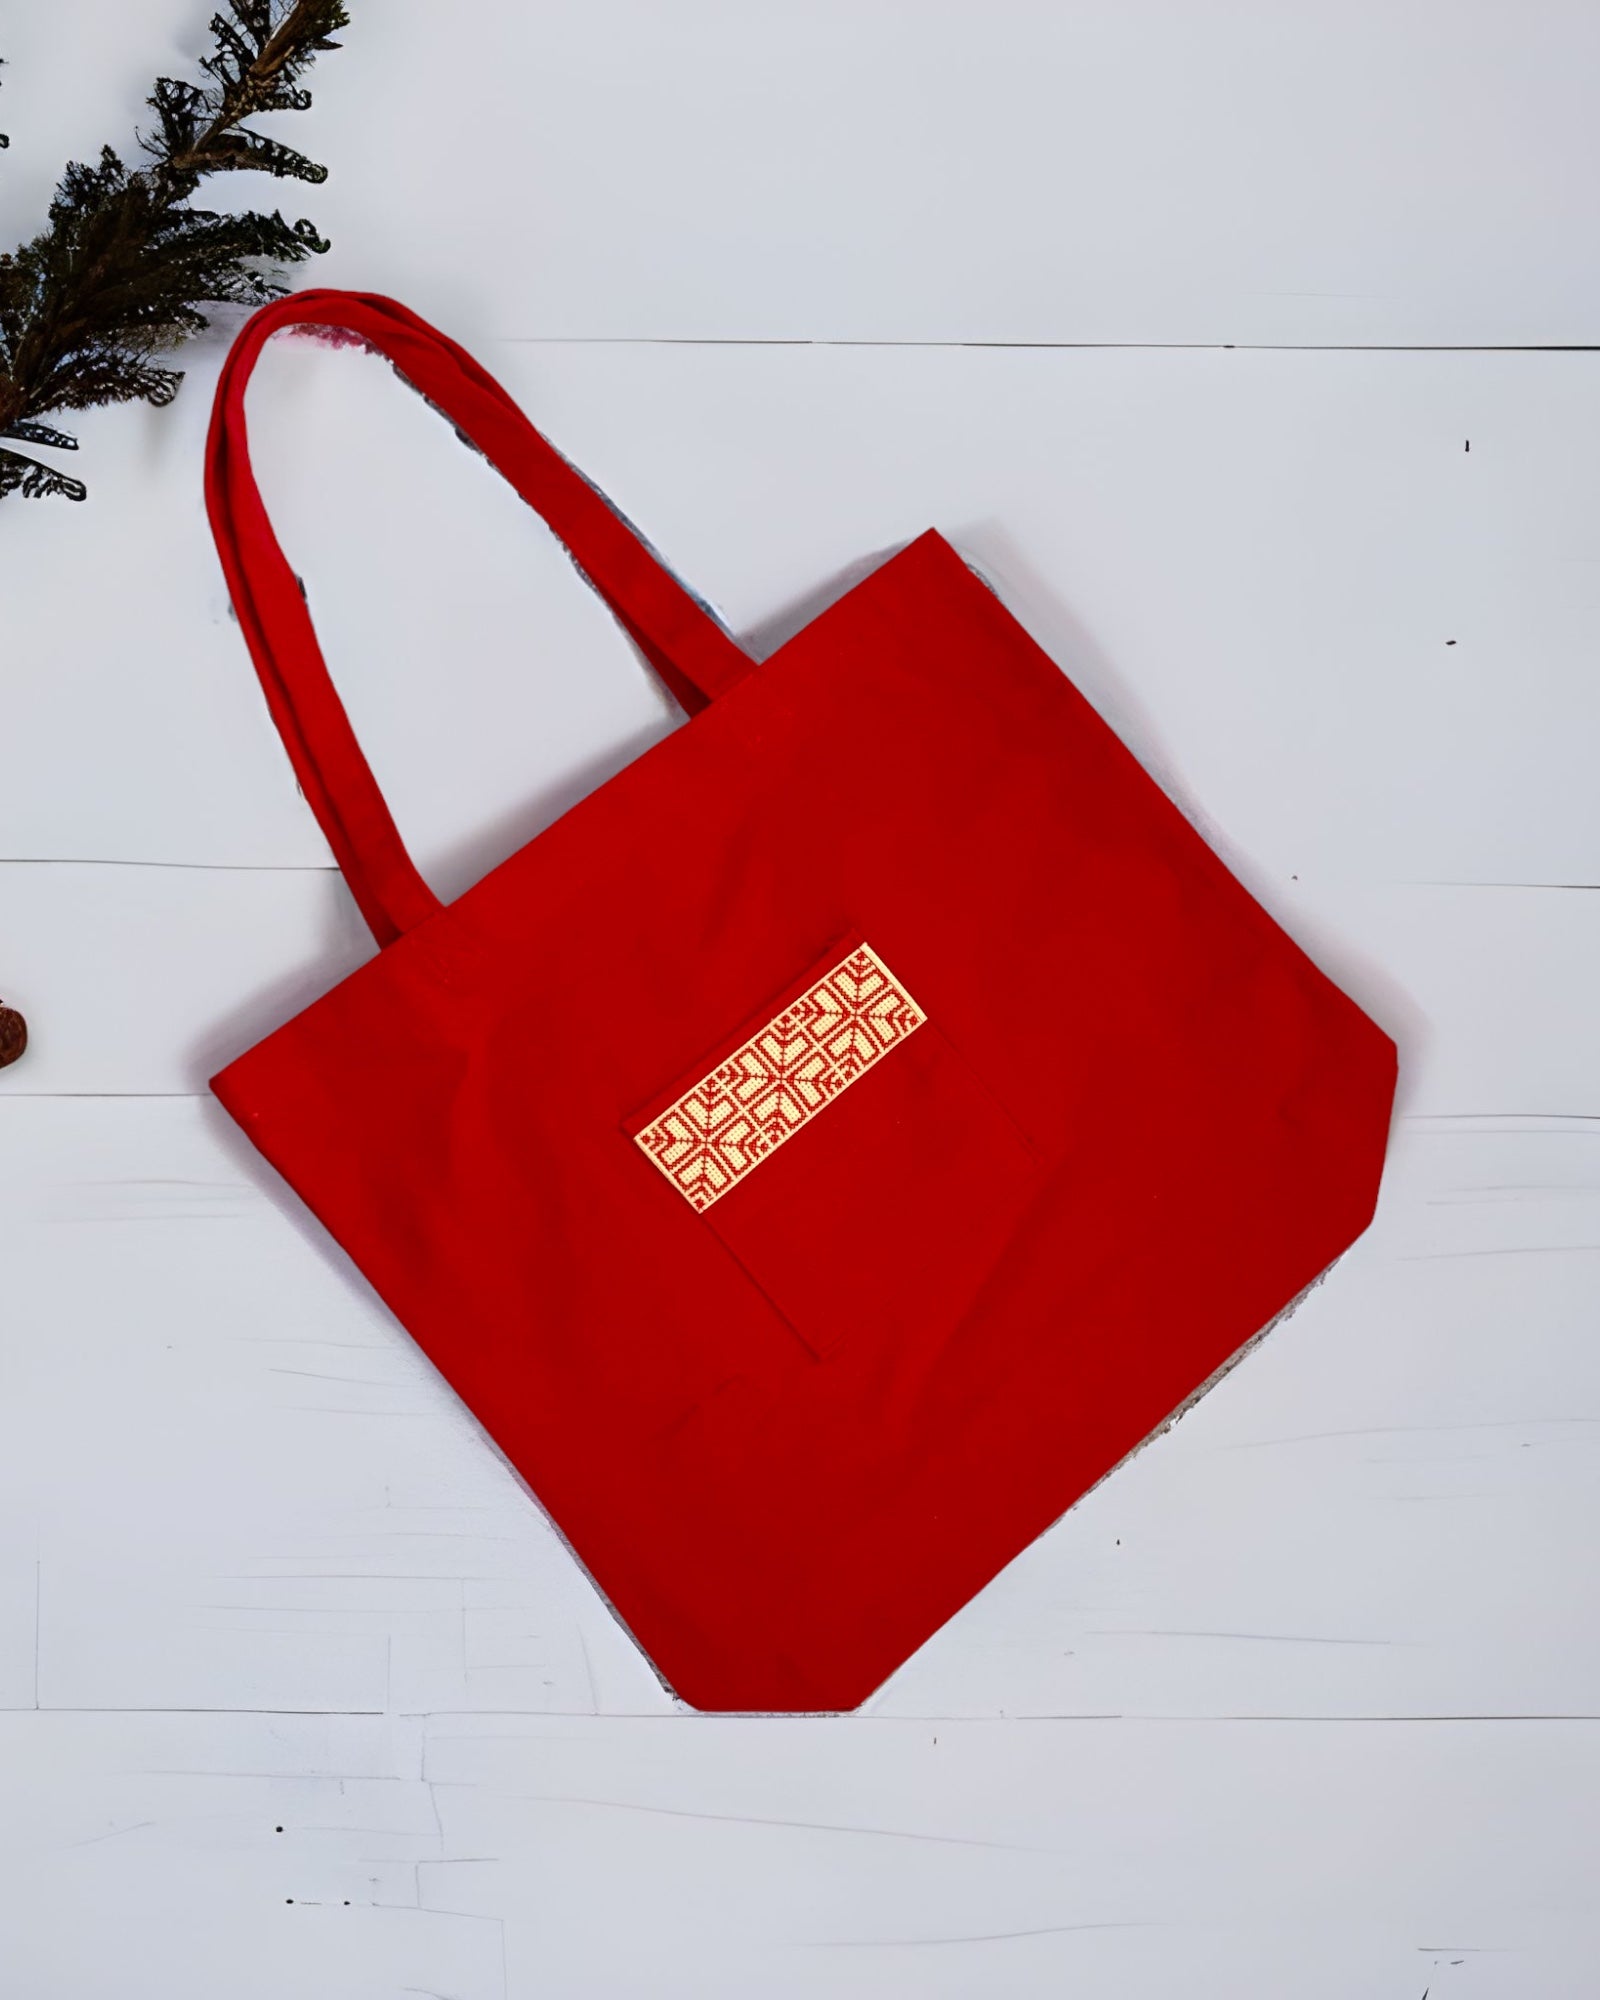 Tatreez Fabric Tote Bag in Red color and Red embroidery on the outside pocket.